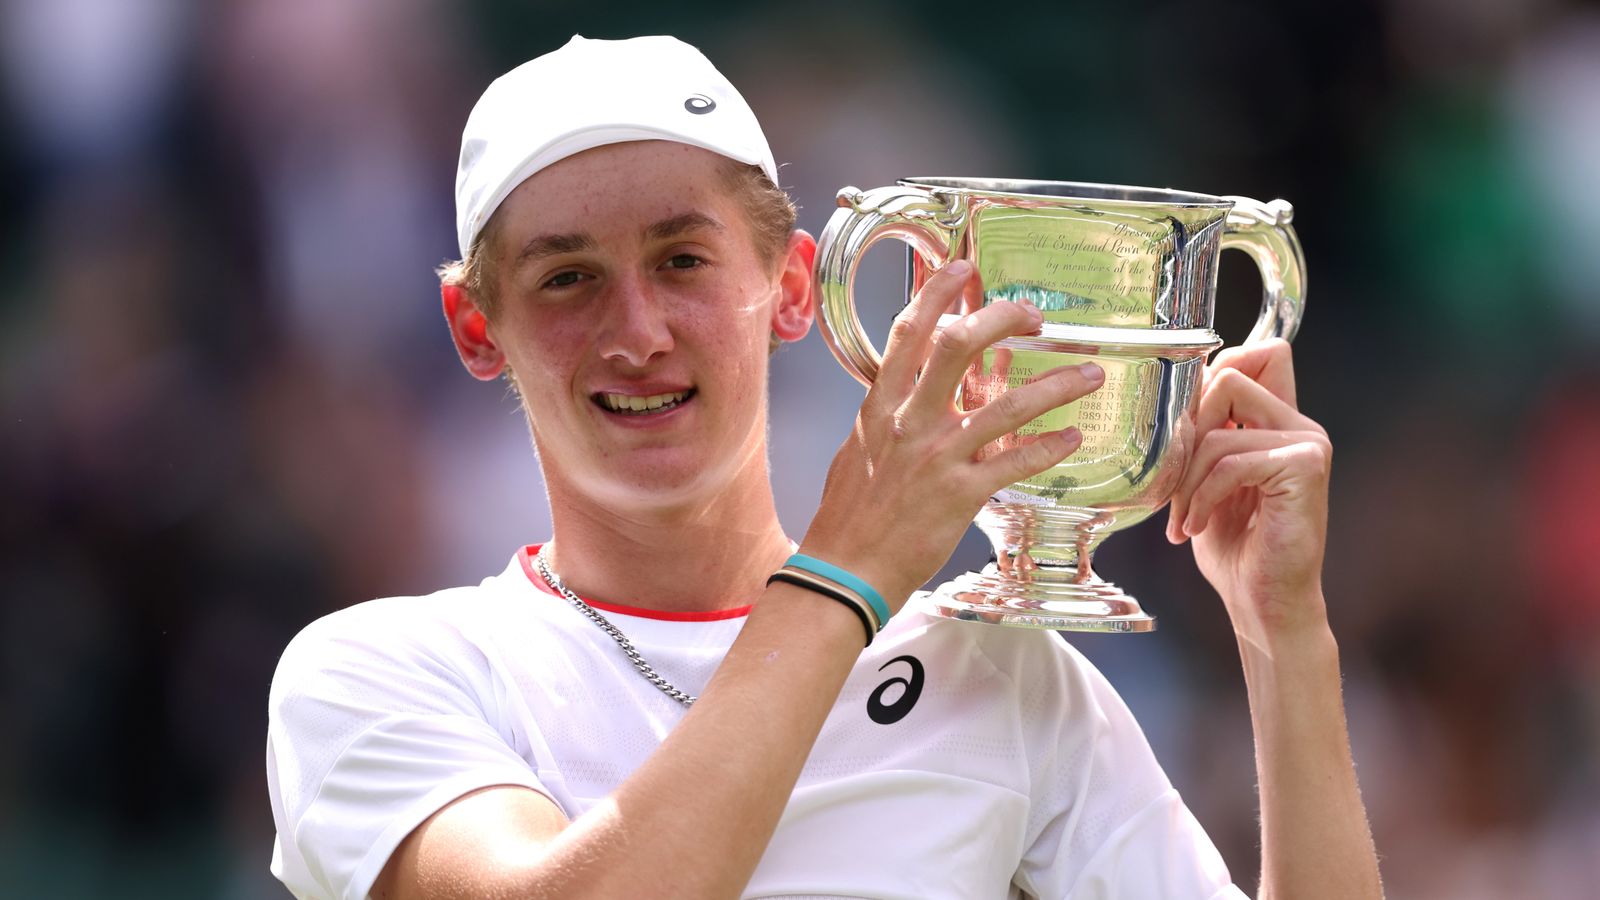 Teenager Henry Searle becomes first Brit to win Wimbledon boys singles title in more than 60 years UK News Sky News